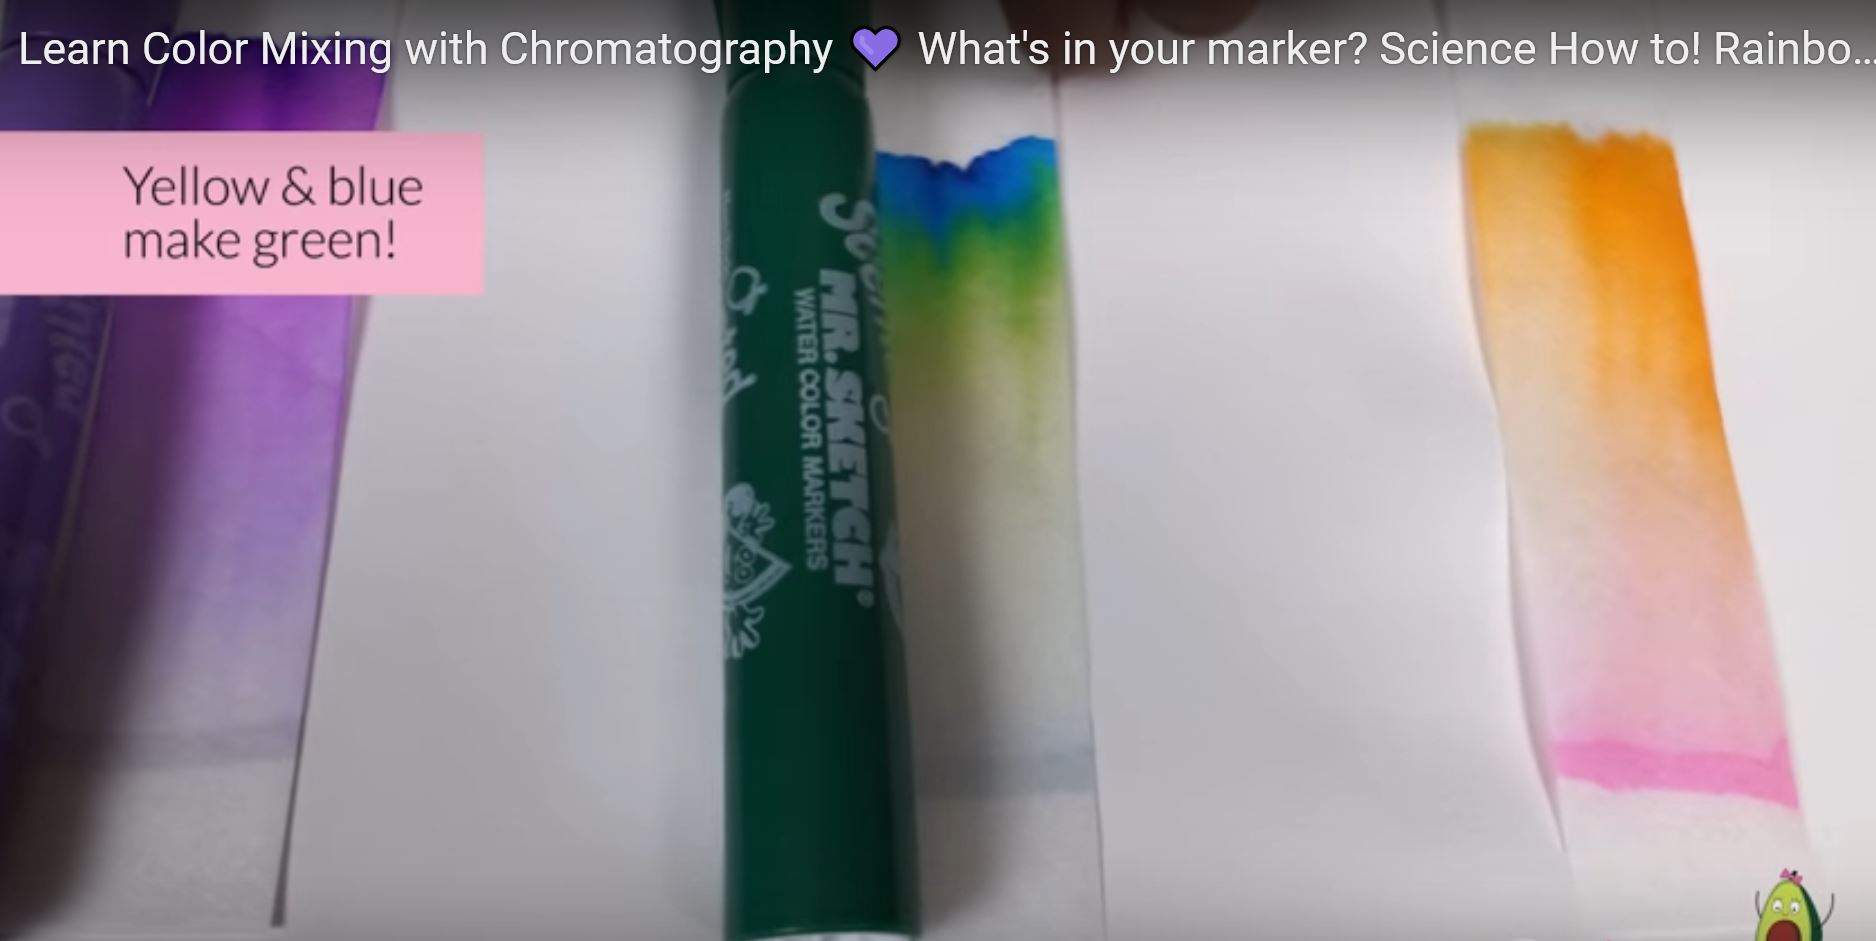 Yellow Scope - Paper Chromatography: The Art & Science of Color